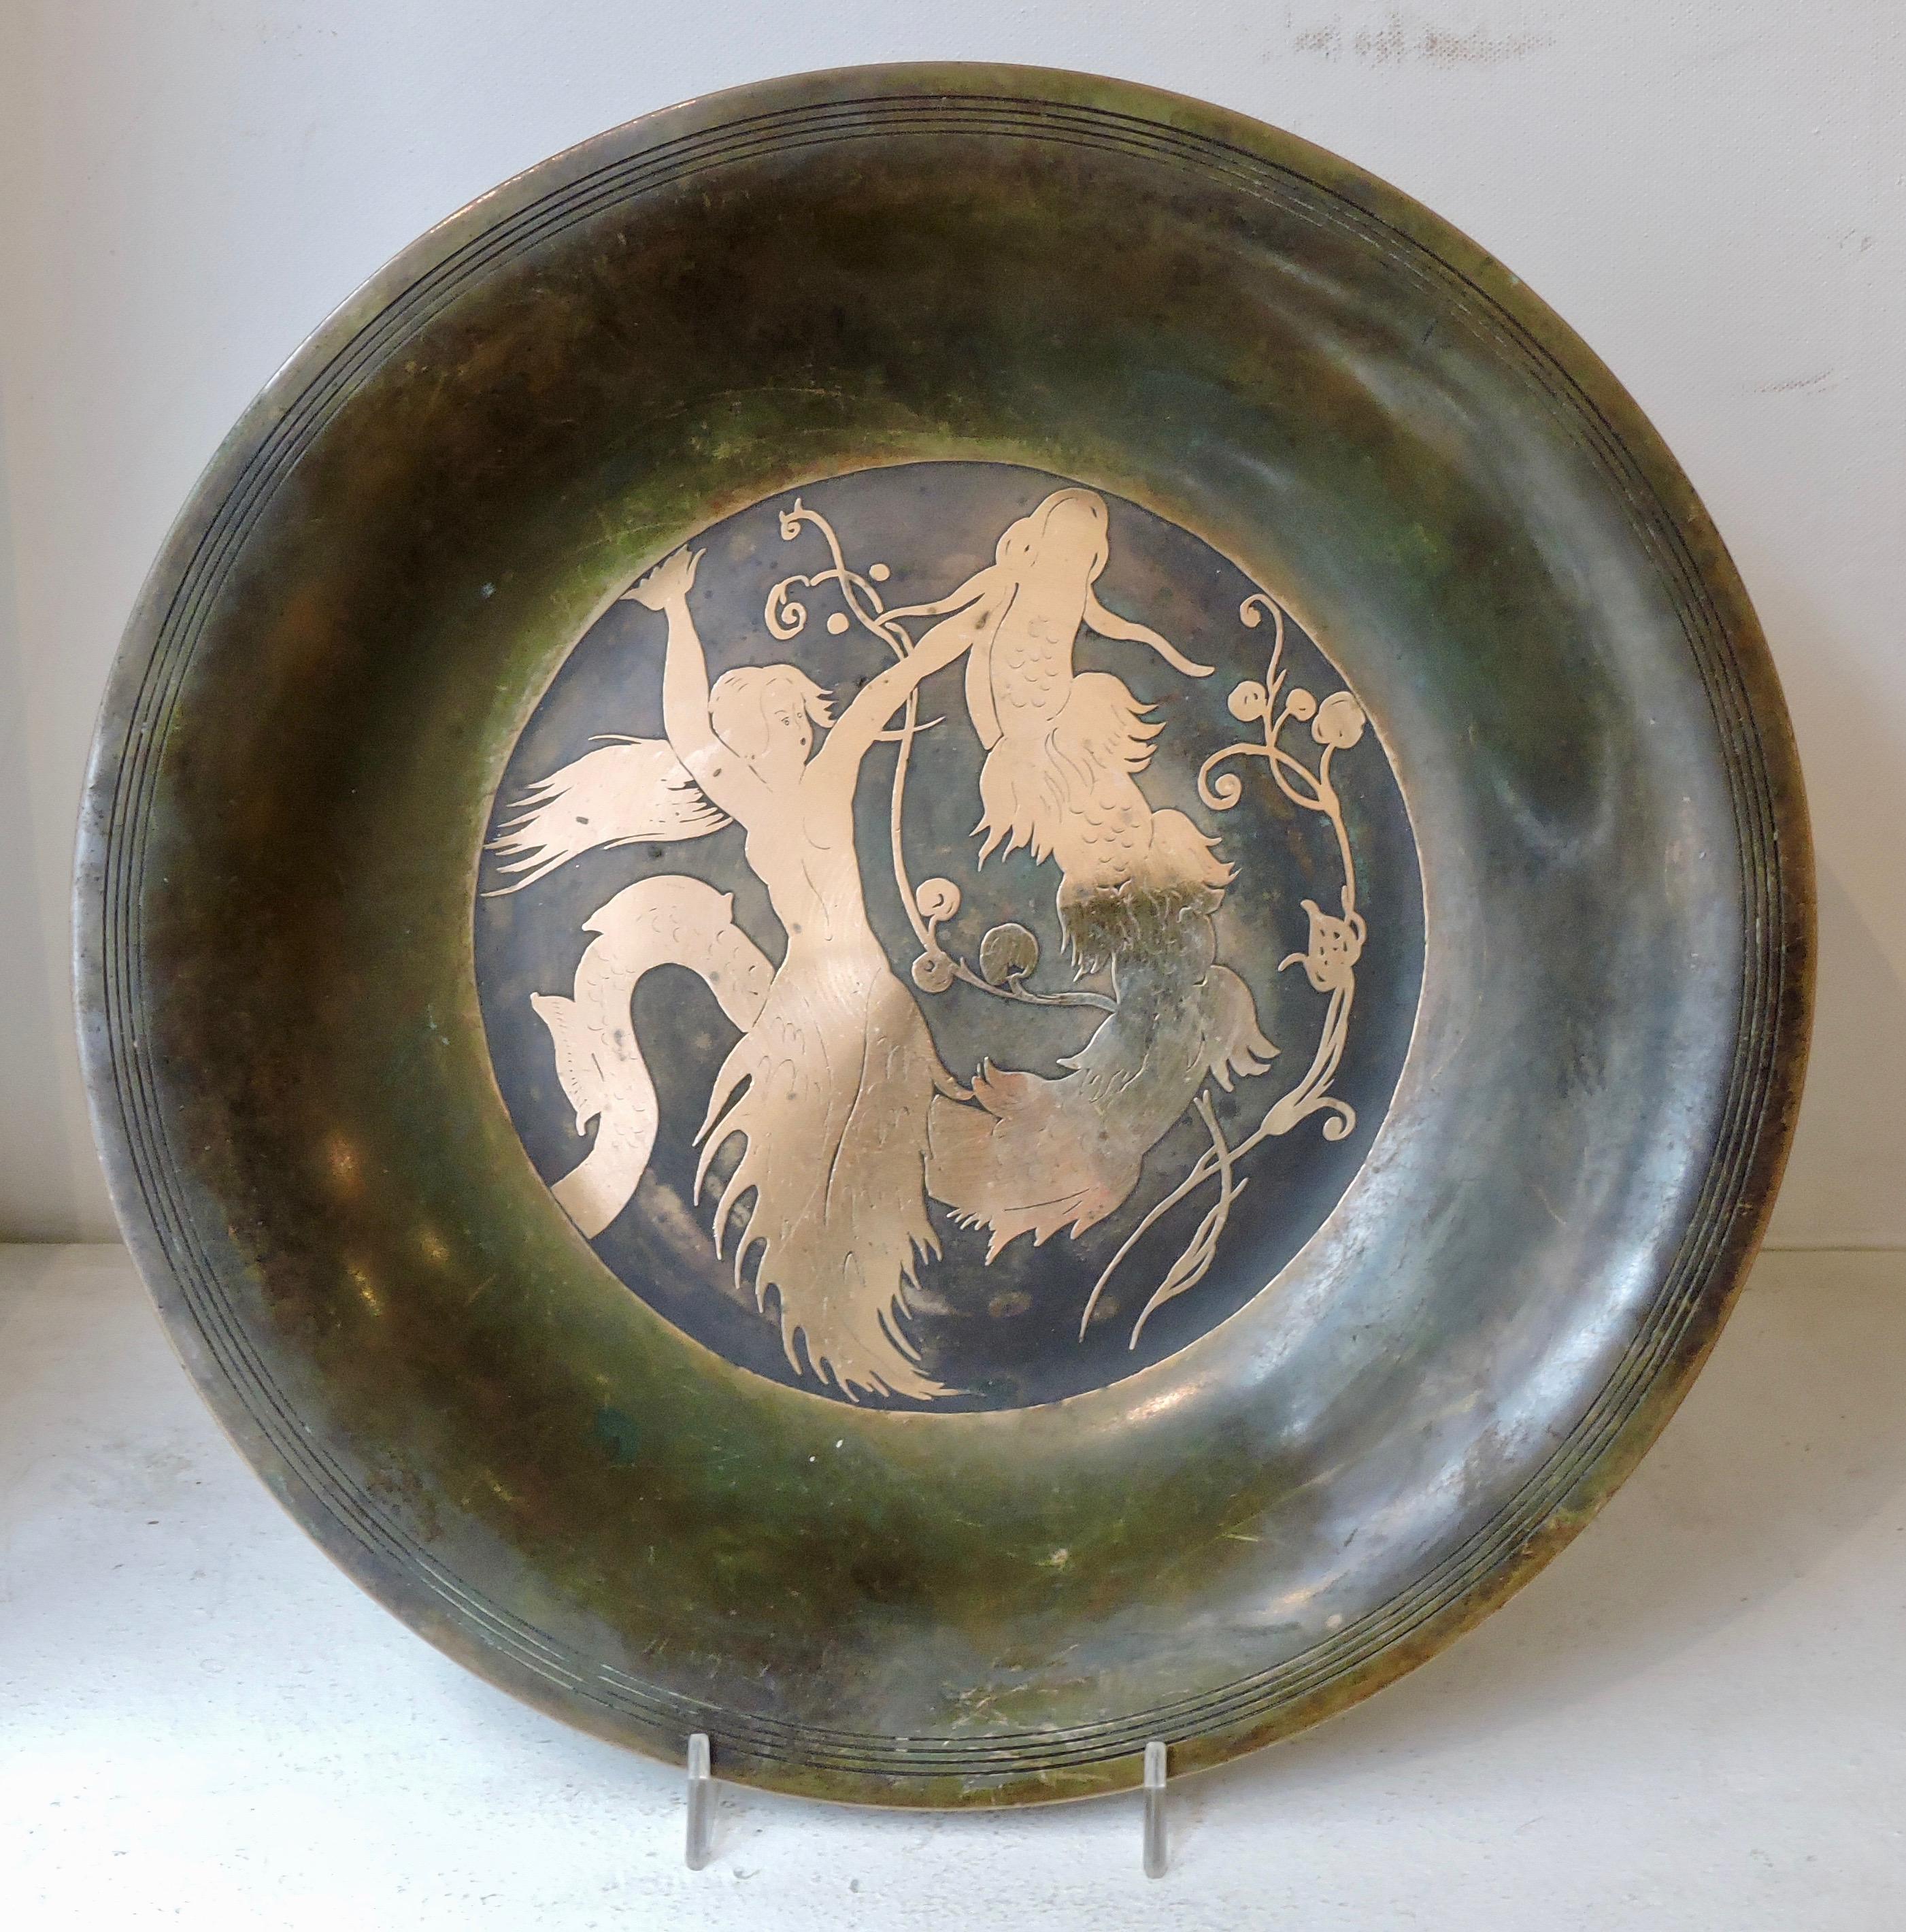 Beautiful inlaid bronze patinated bowl designed by Just Andersen (1884-1943)
Inlaid scene of the little mermaid.
Designed by Danish bronze artist Just Andersen (1884-1943),
circa 1935.
Stamped and numbered on the back.